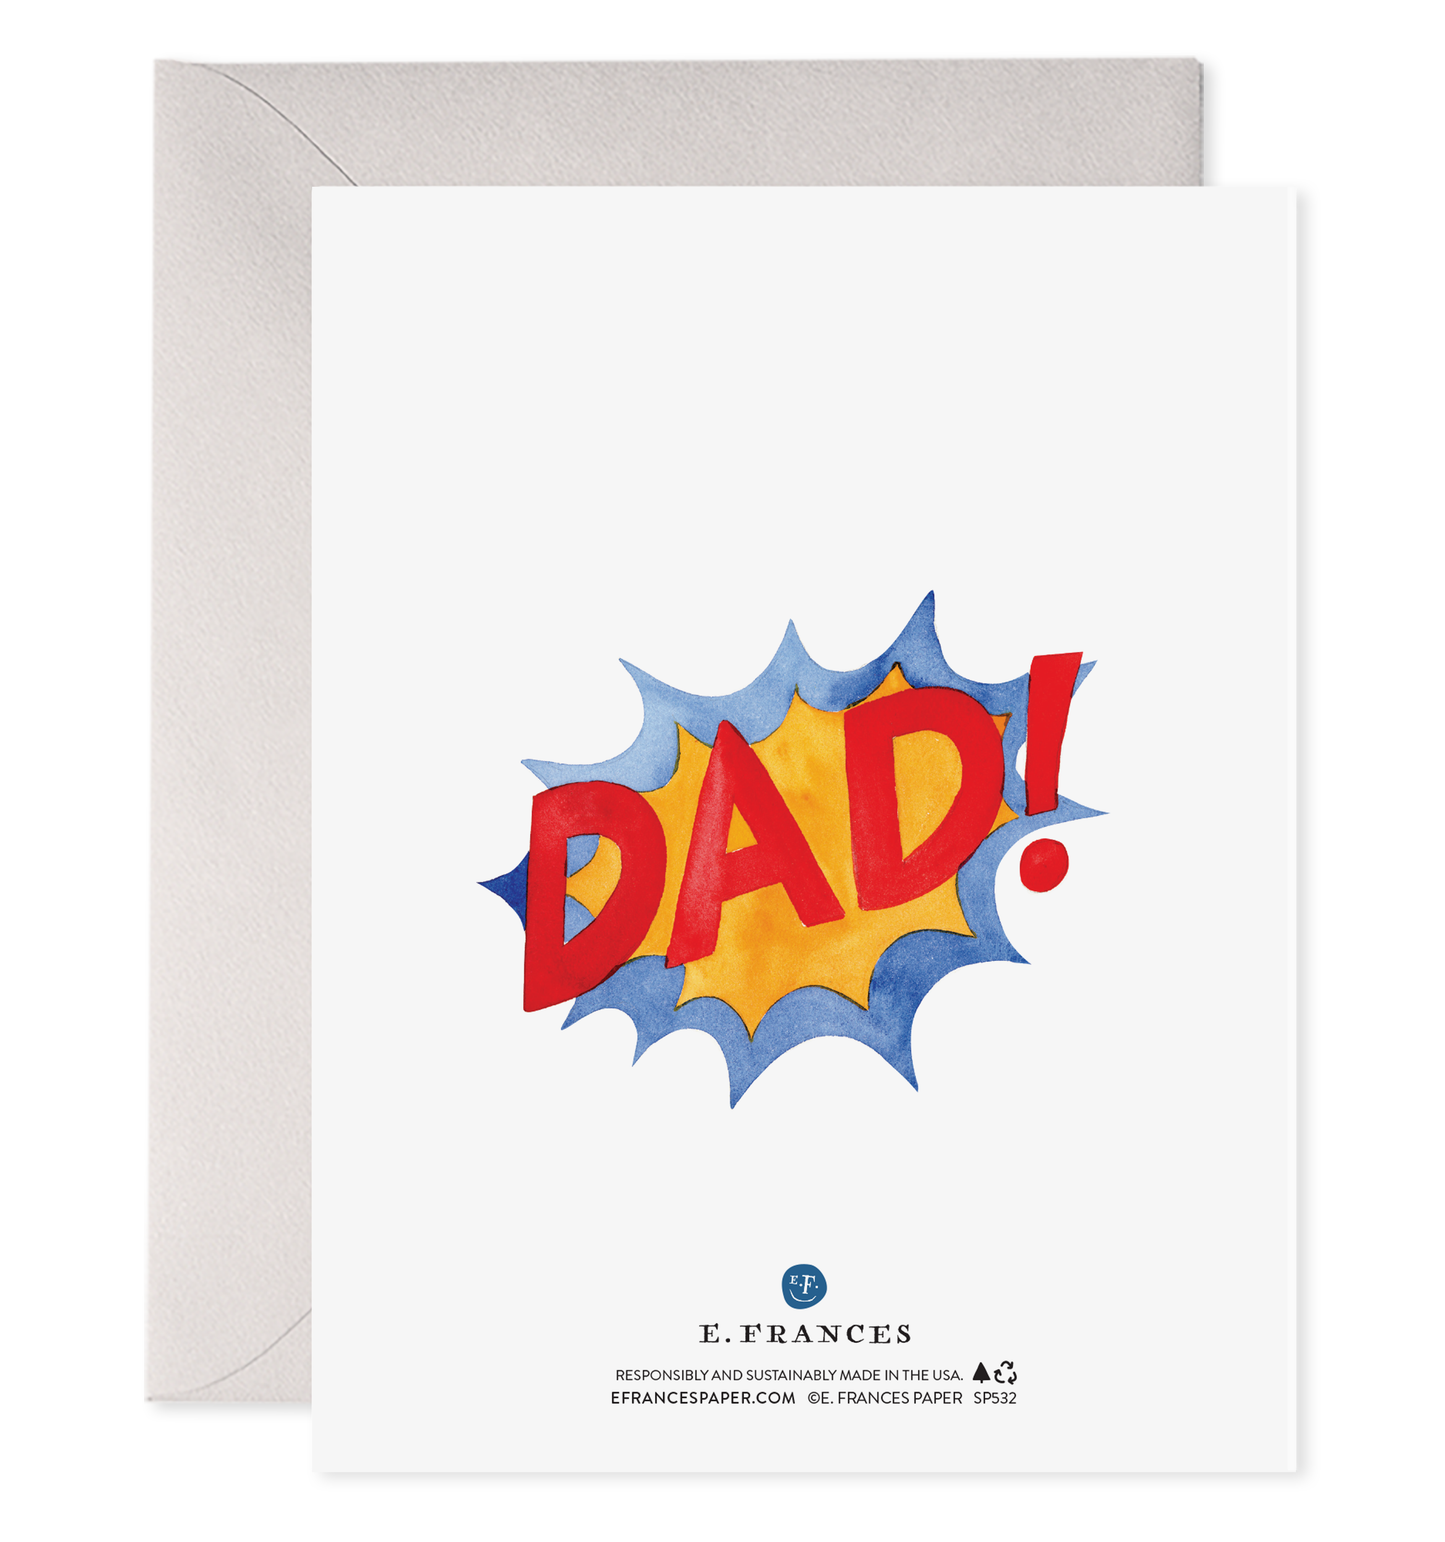 Superdad | Father's Day Greeting Card